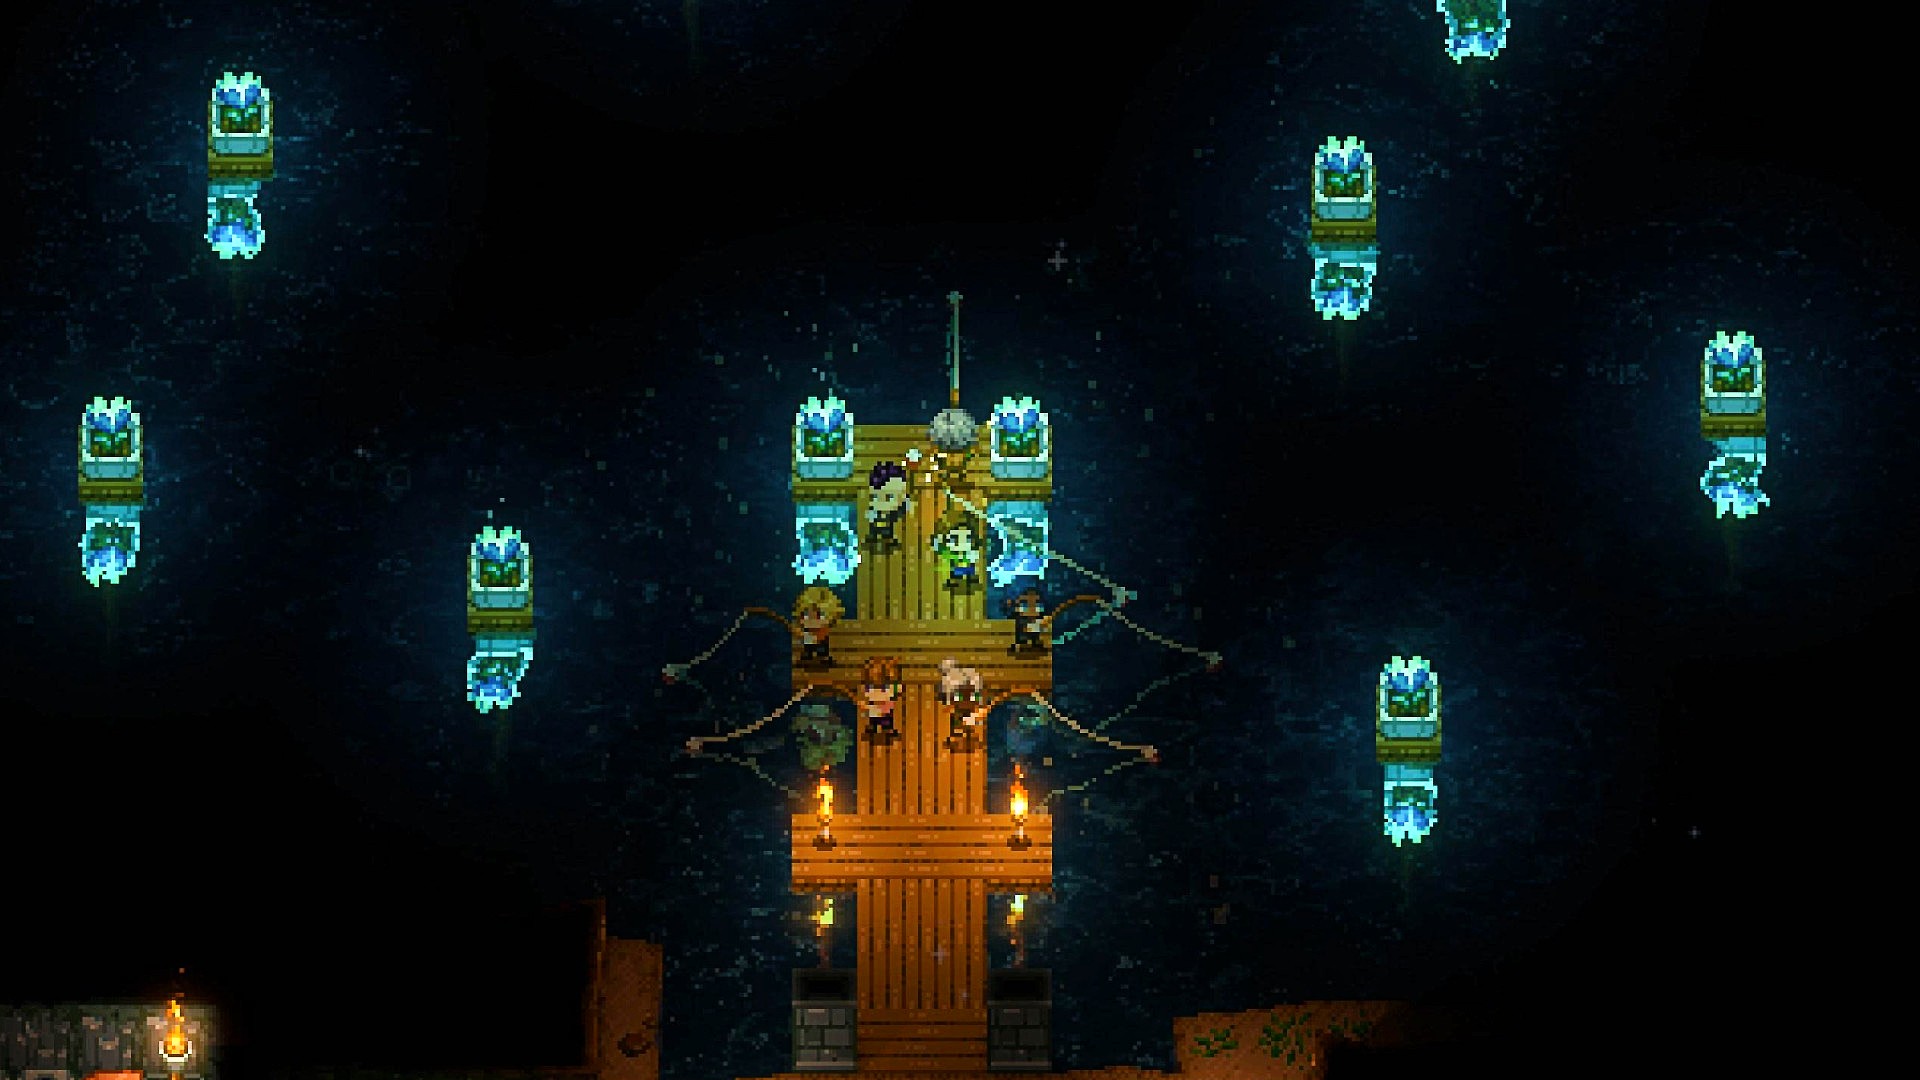 Terraria-like Core Keeper gets its first big content update next month